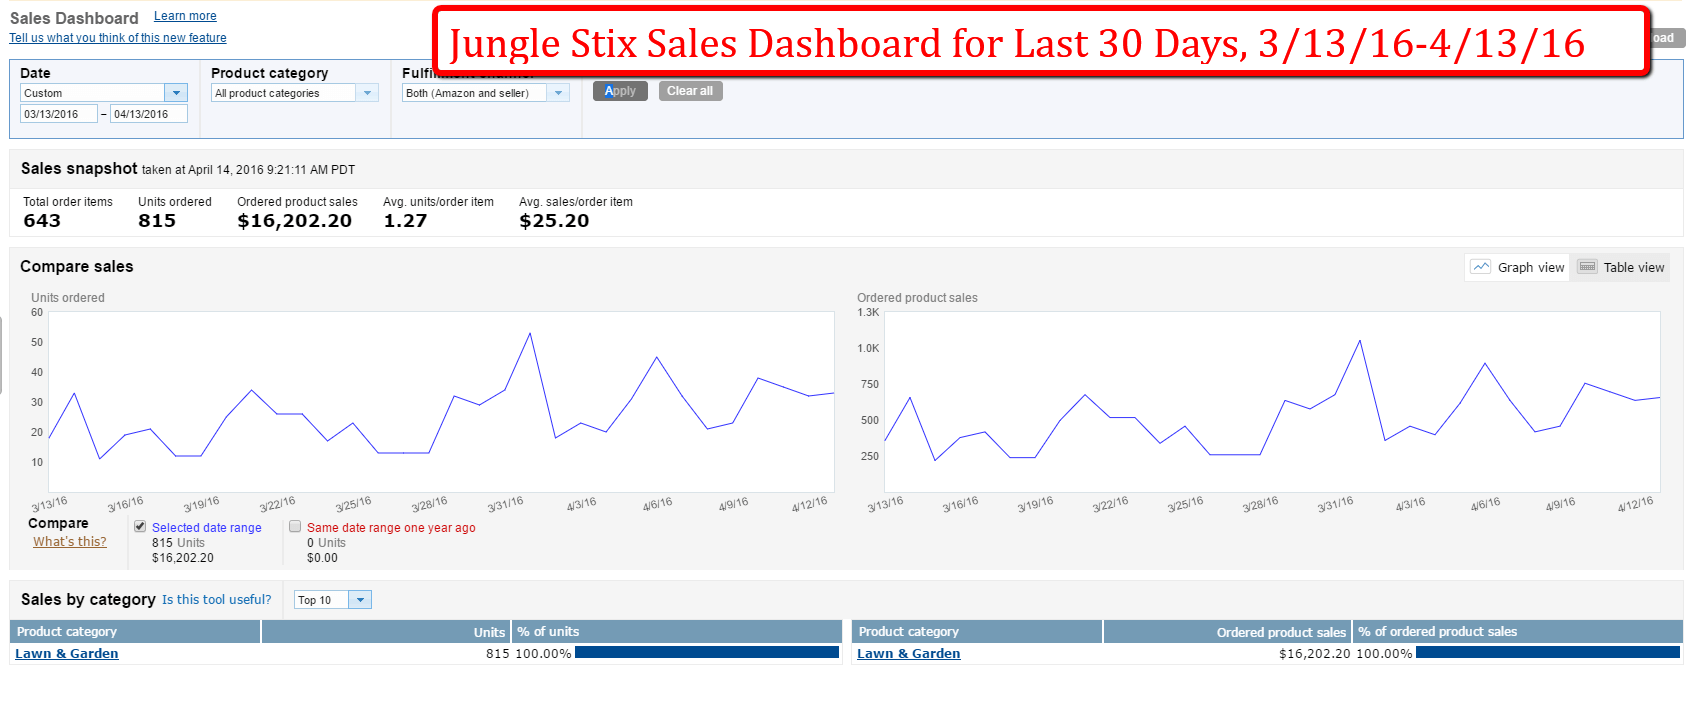 sales_dashboard_for_last_30_days